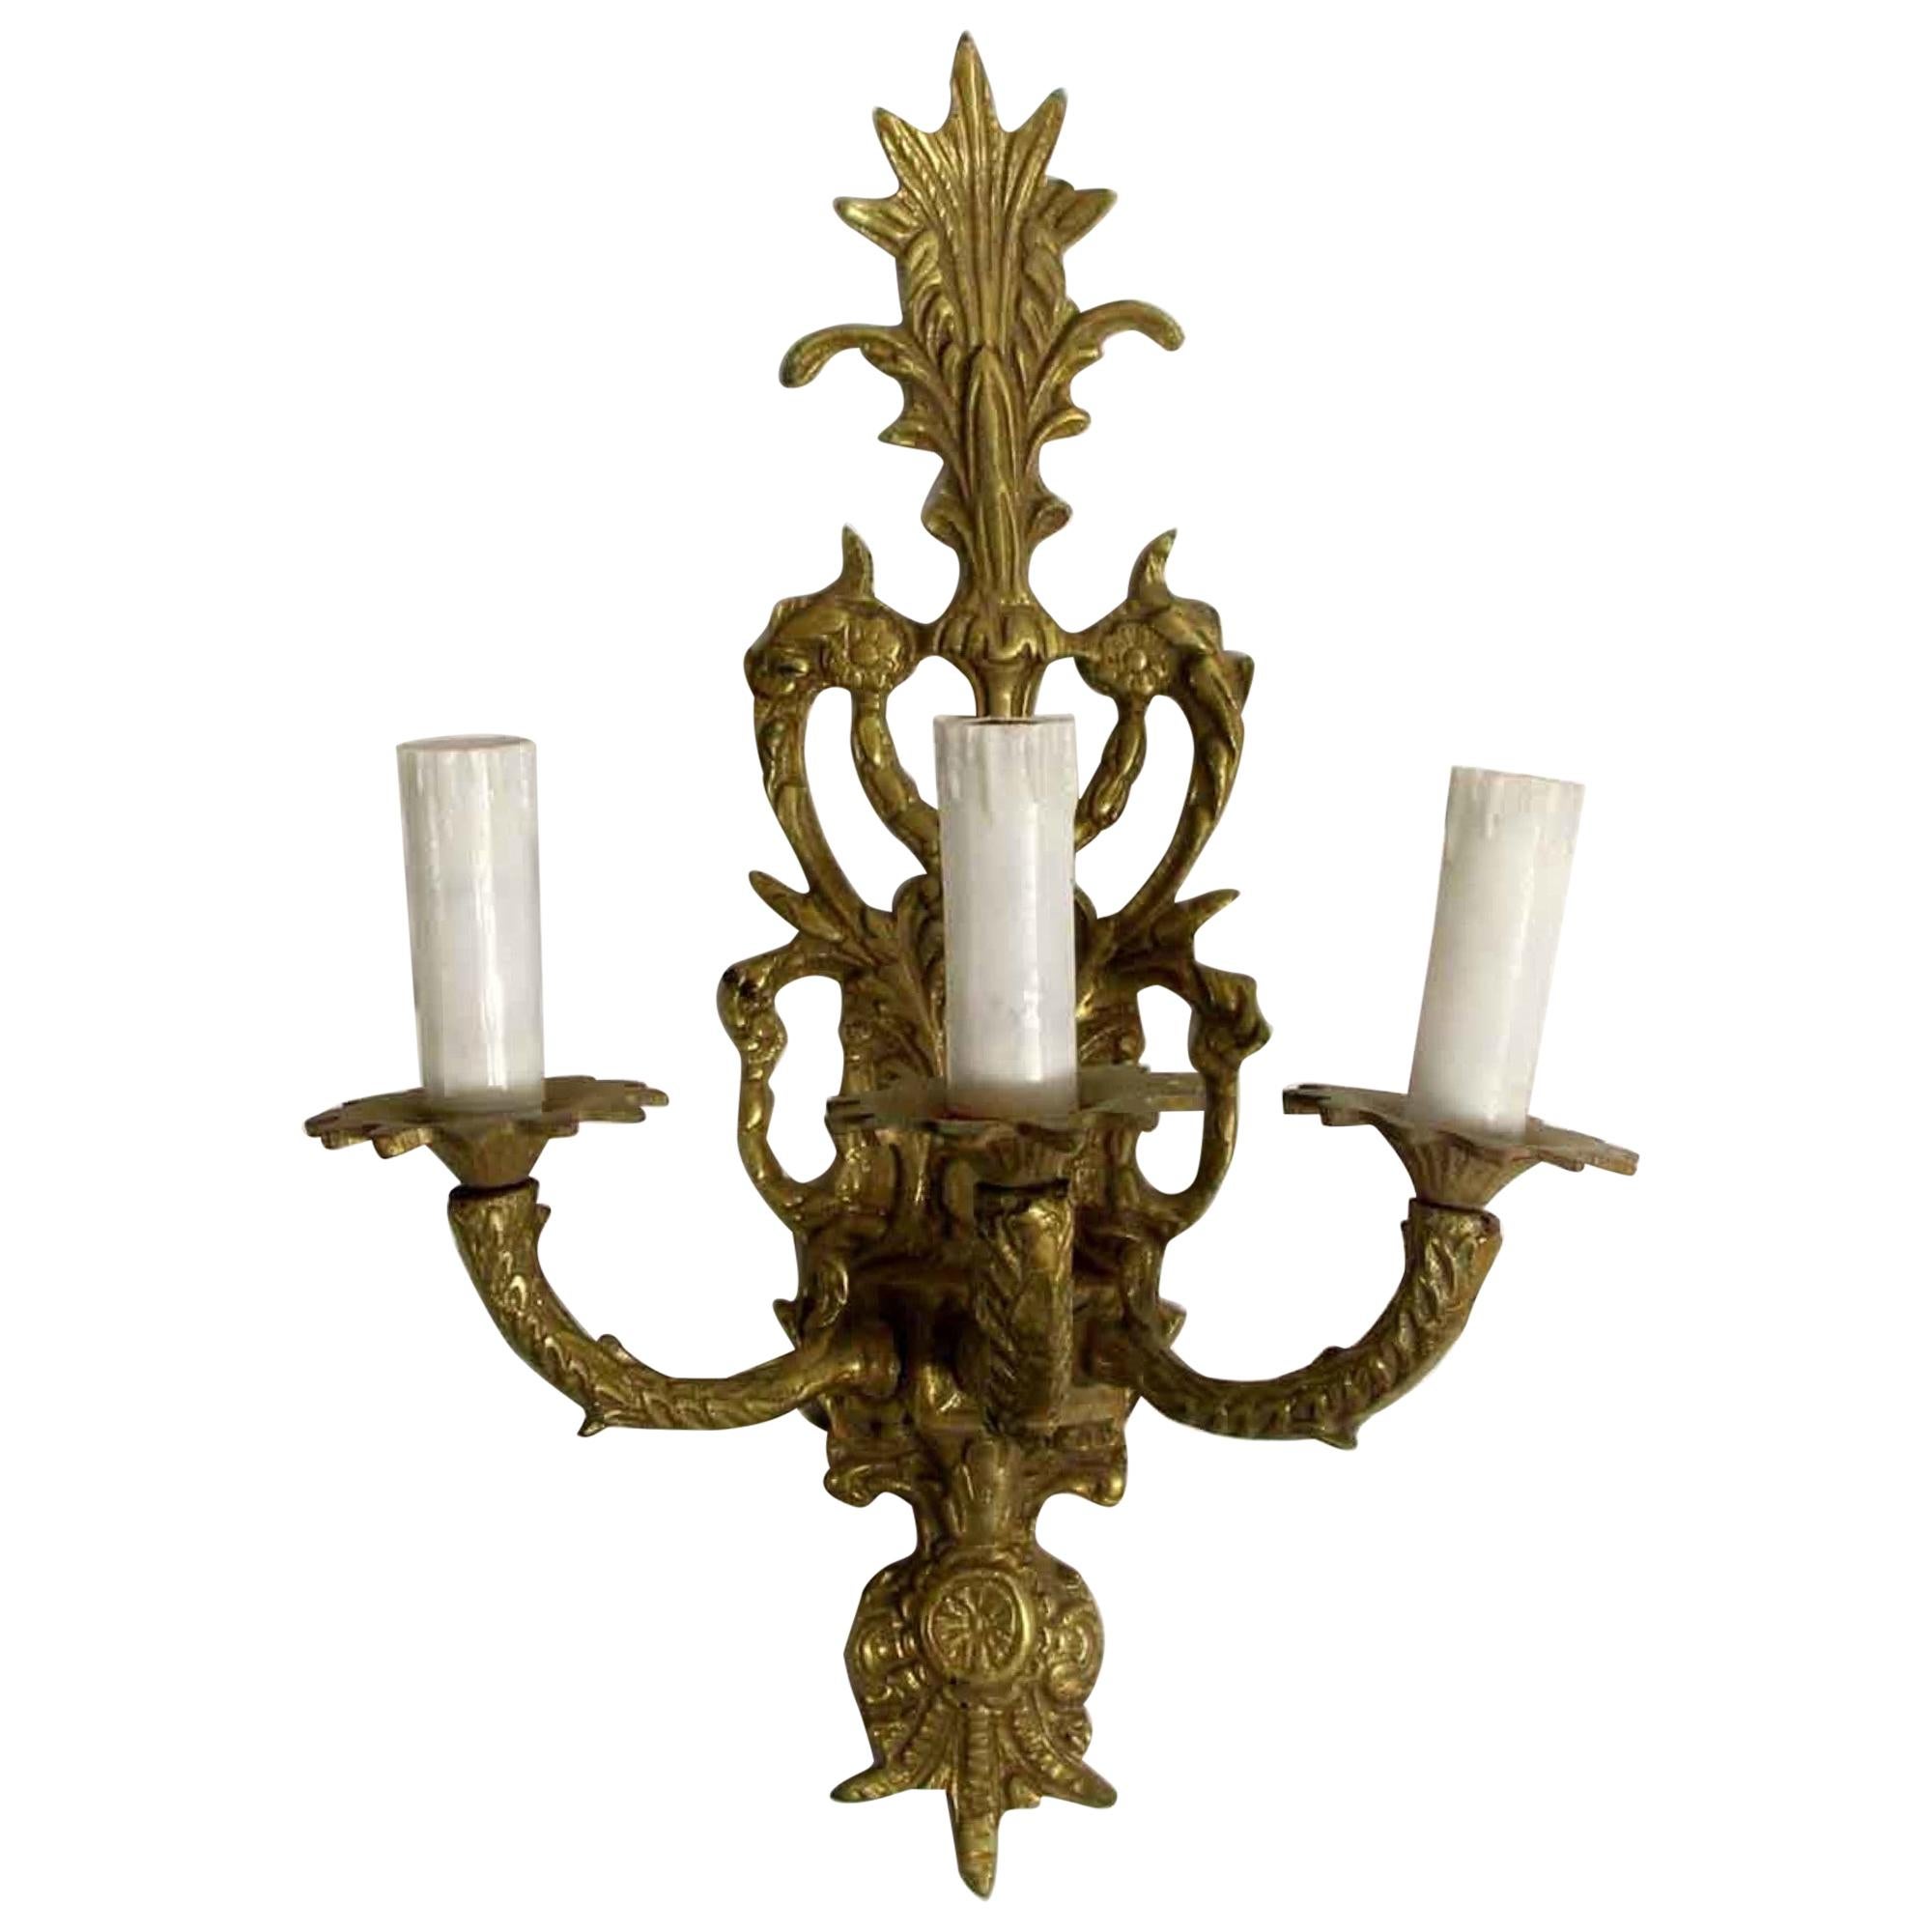 1970s cast brass 3 arm sconces with foliage detail. French style. Priced as a pair. Please note, this item is located in our Los Angeles, CA location.